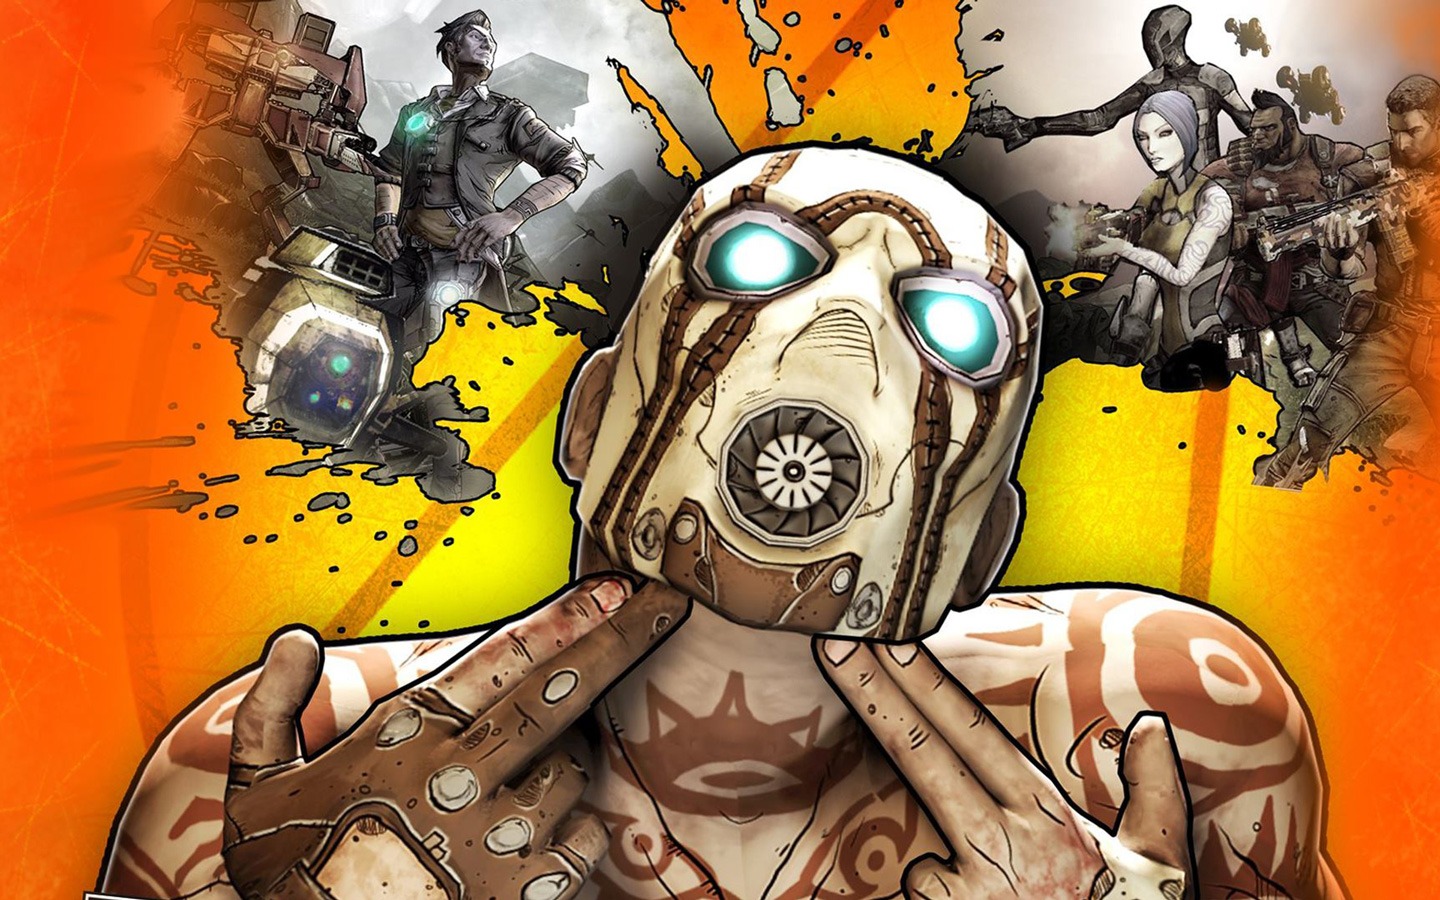 Take-Two confirms new Borderlands game amidst Gearbox acquisition